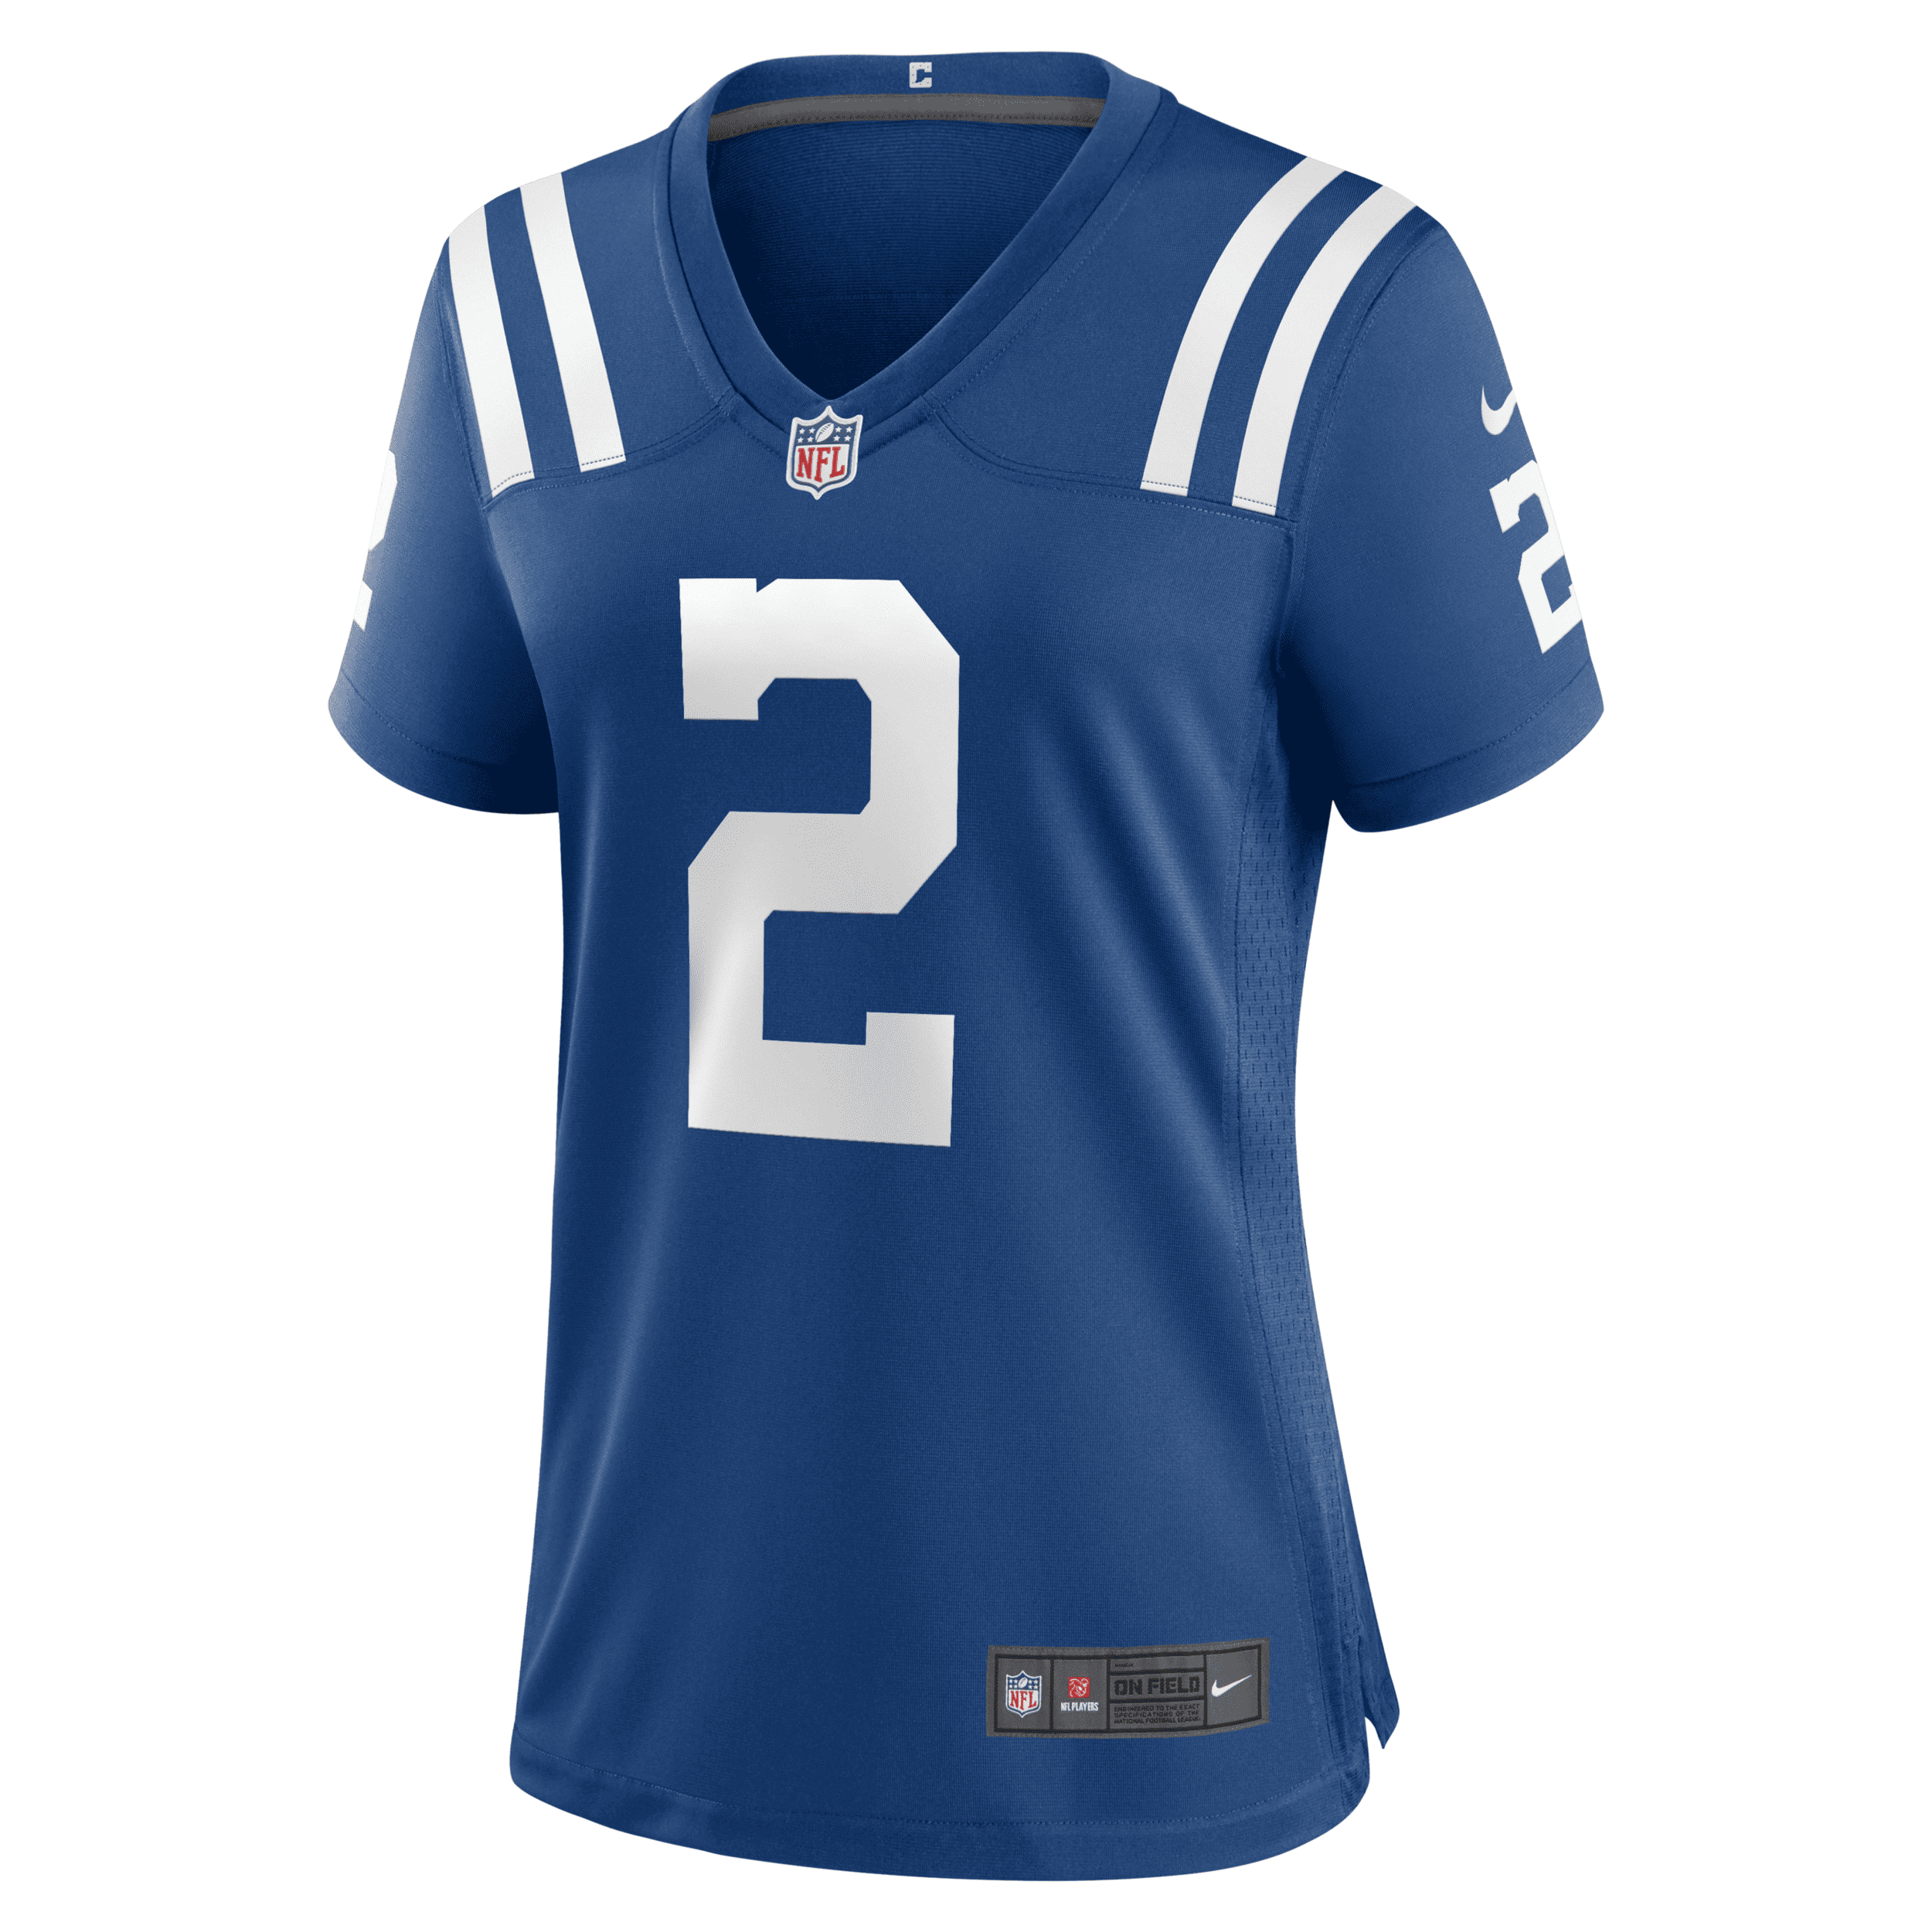 Nike Women's Nfl Indianapolis Colts (carson Wentz) Game Football Jersey In Blue